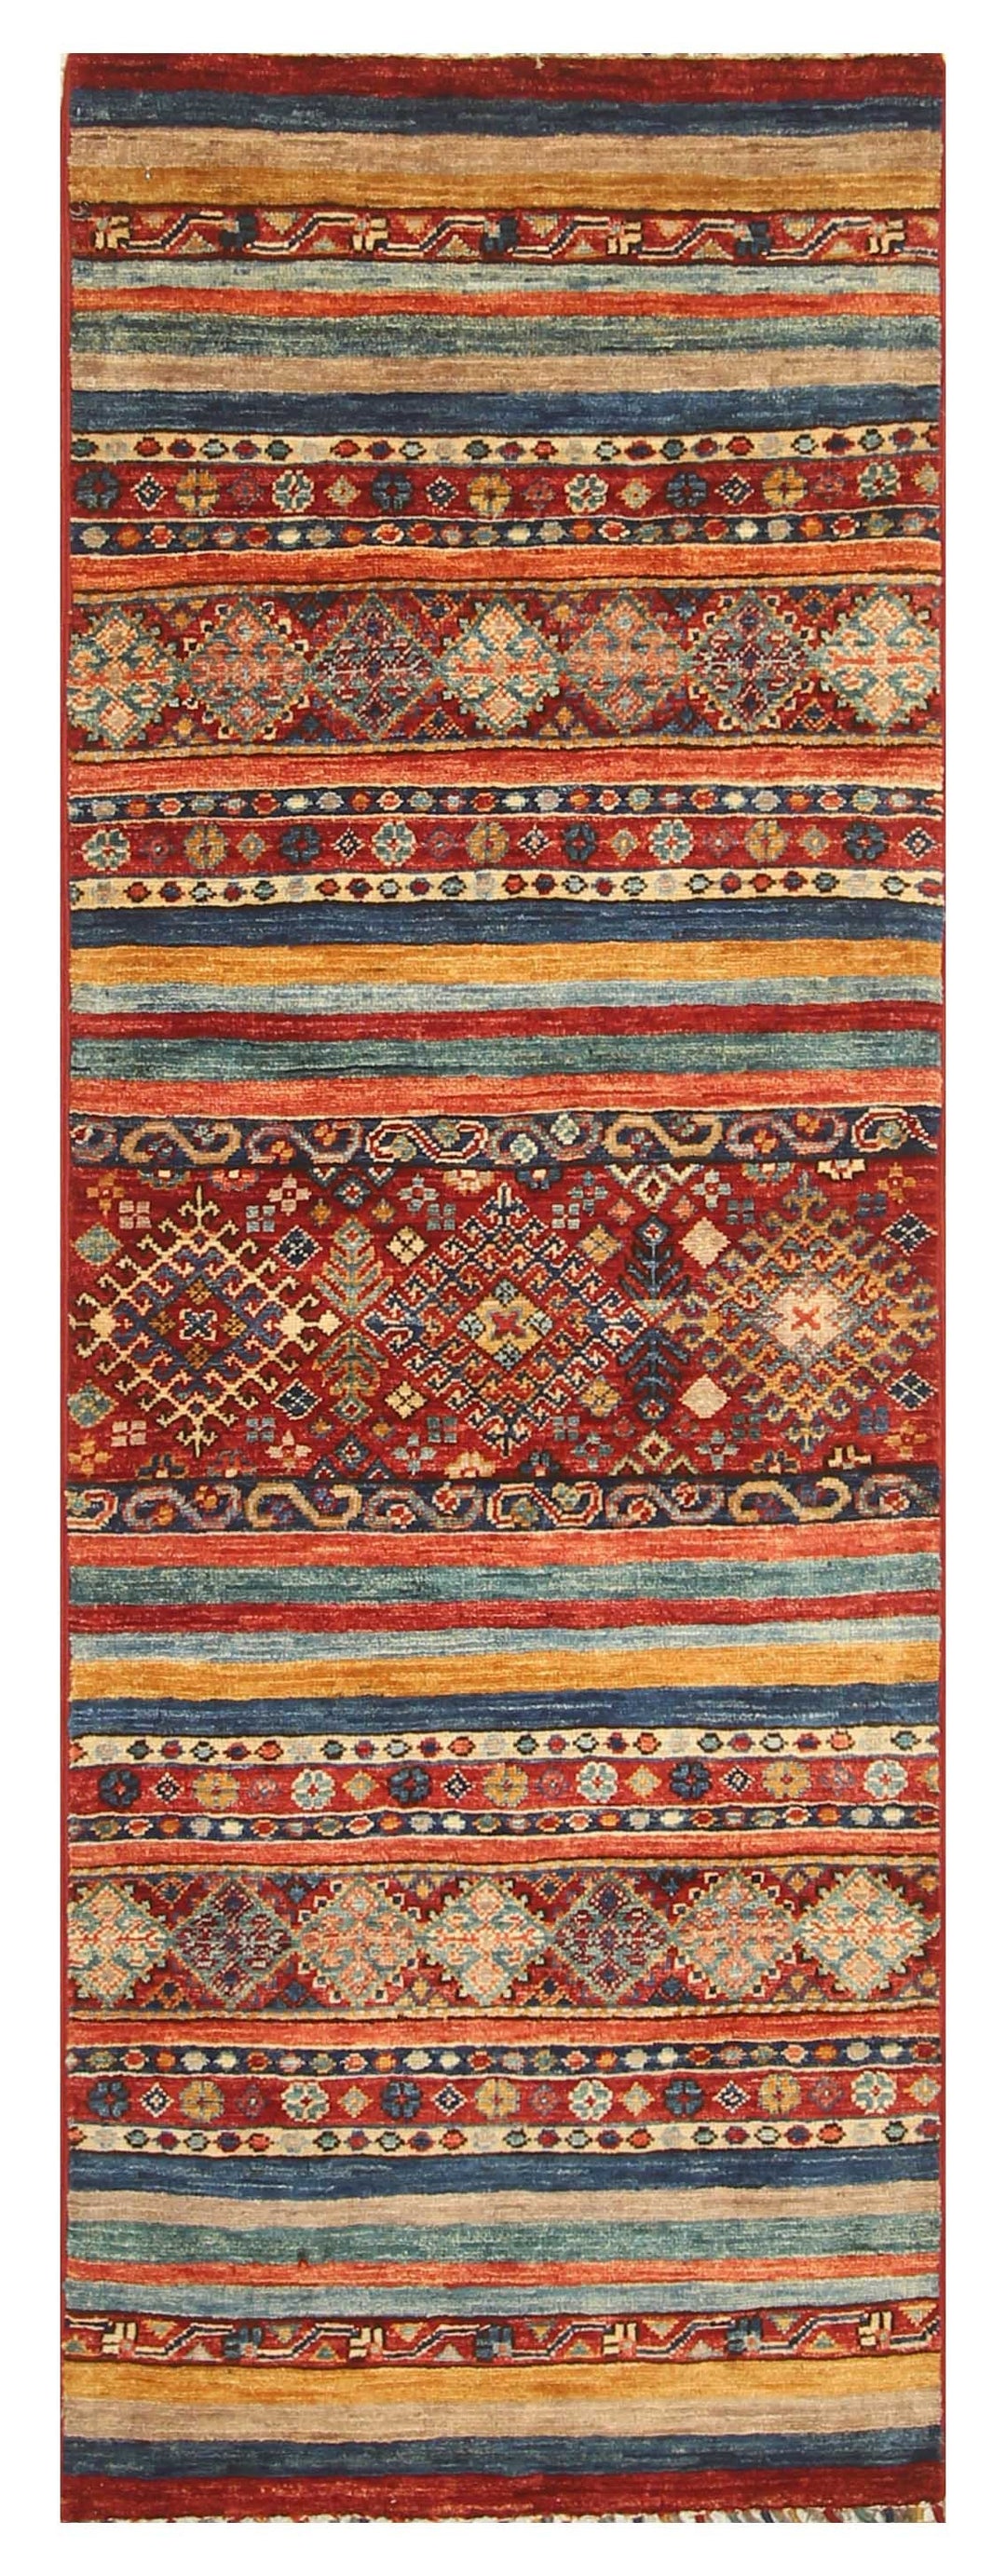 SOLD 6 ft Tribal Red Multicolor Afghan hand knotted Narrow Runner Rug